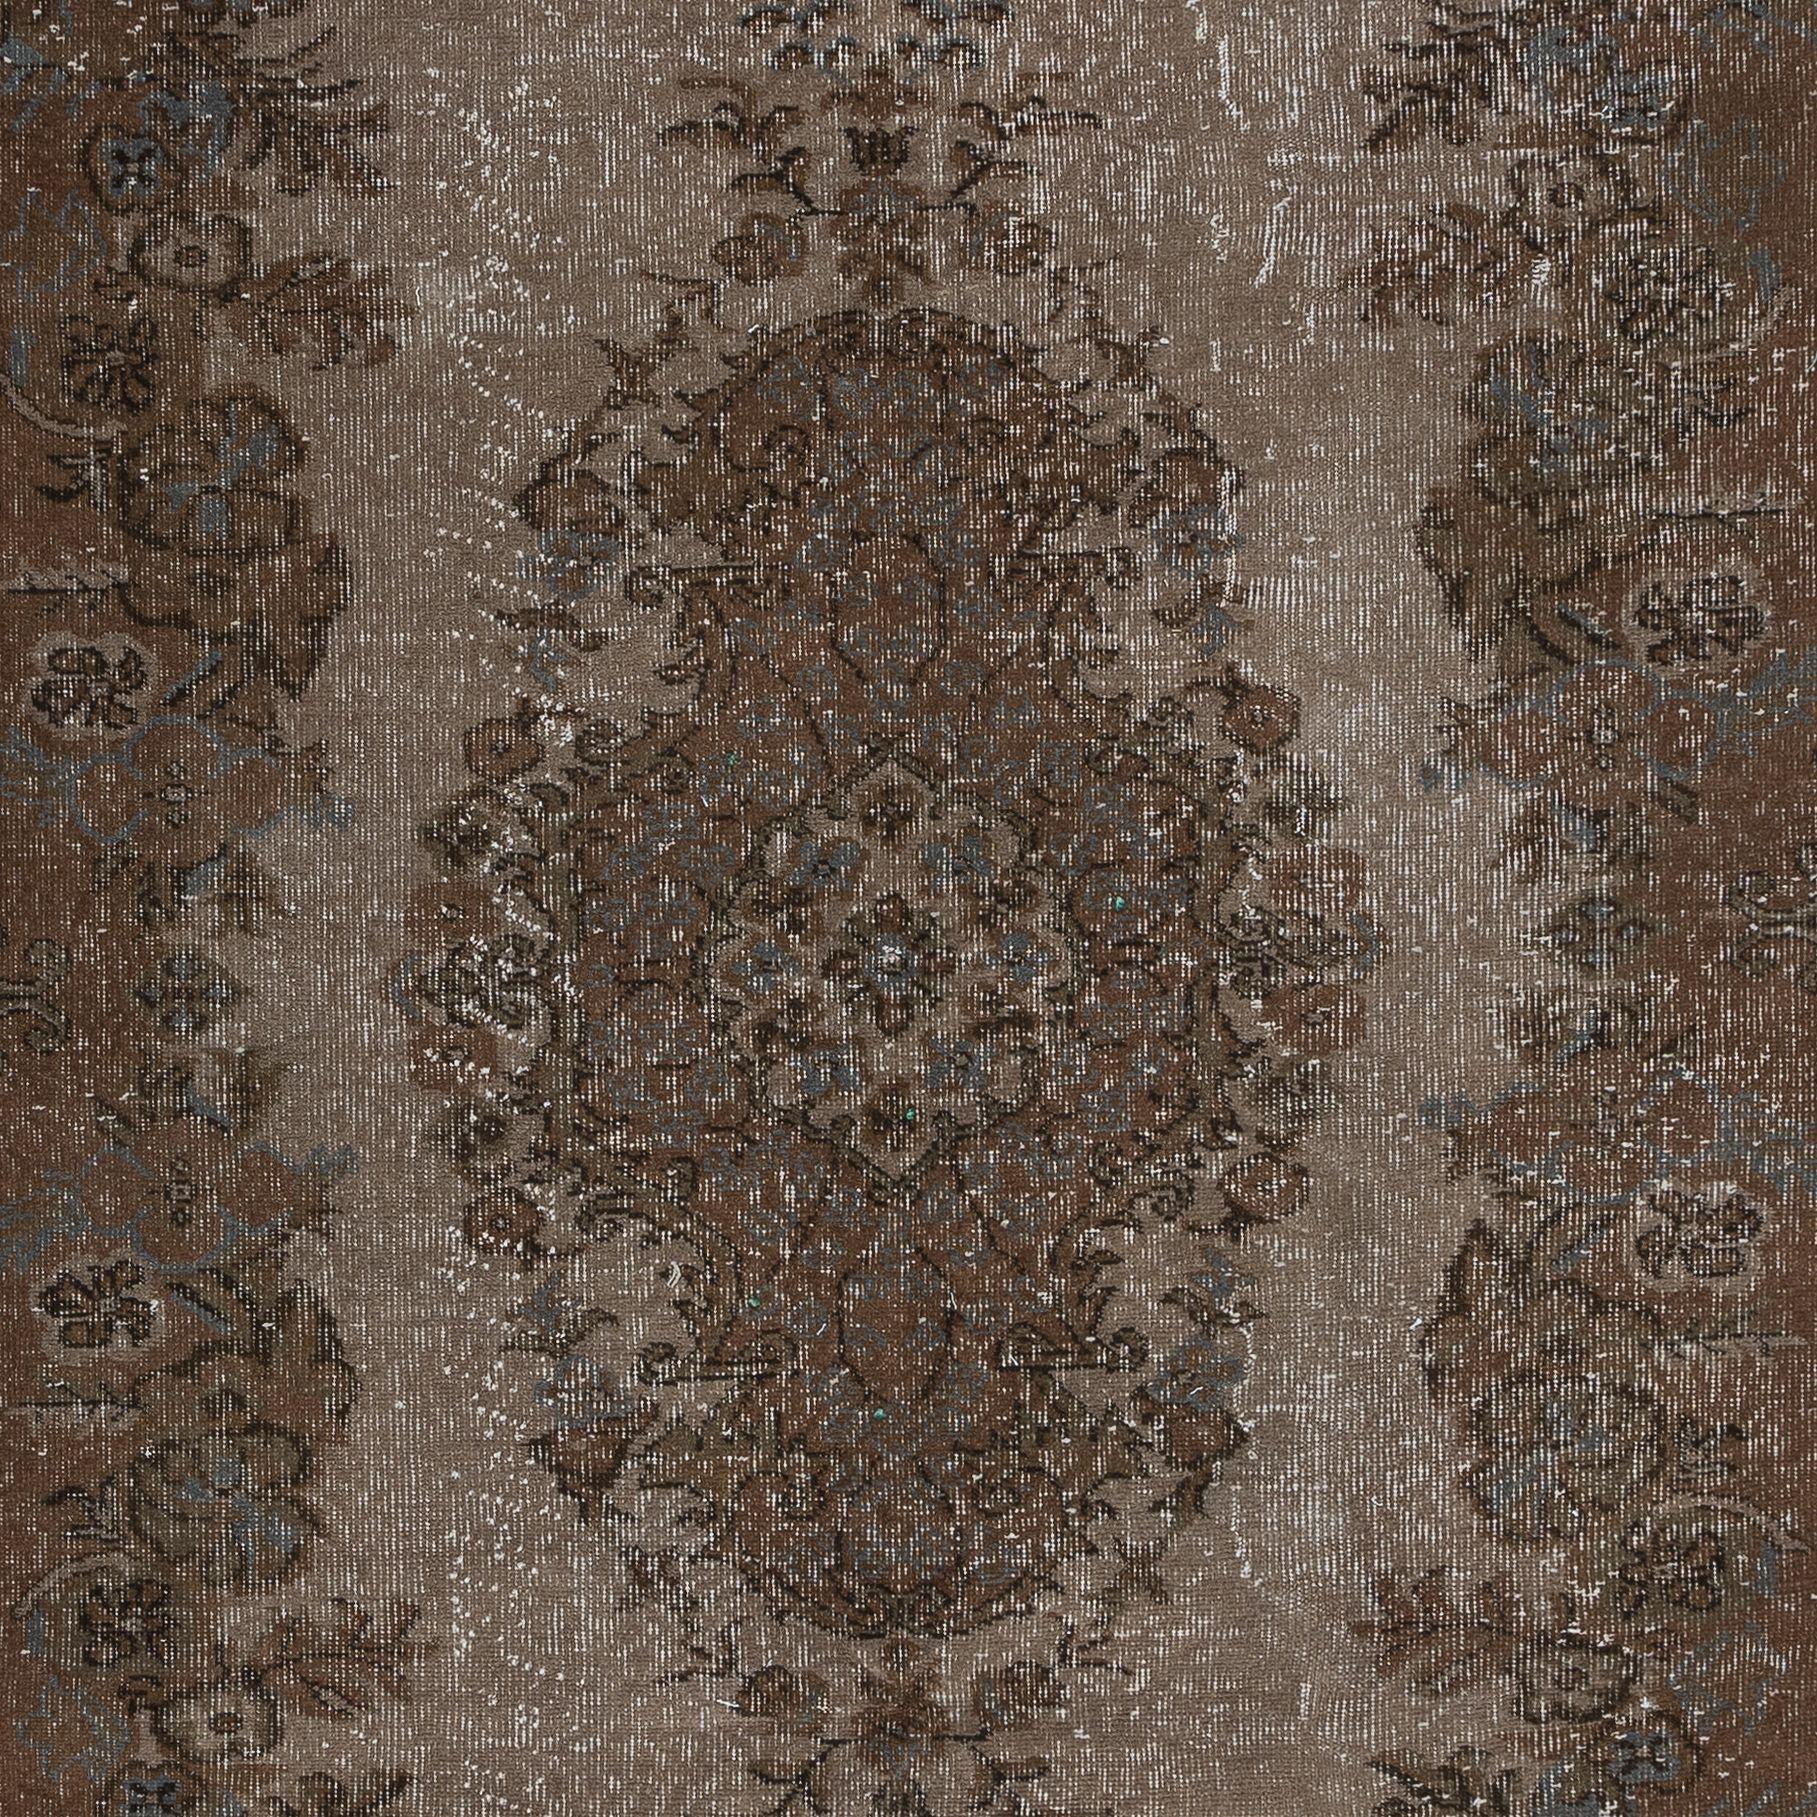 5.4x8.7 Ft Rustic Turkish Area Rug, Brown Handmade Contemporary Carpet In Good Condition For Sale In Philadelphia, PA